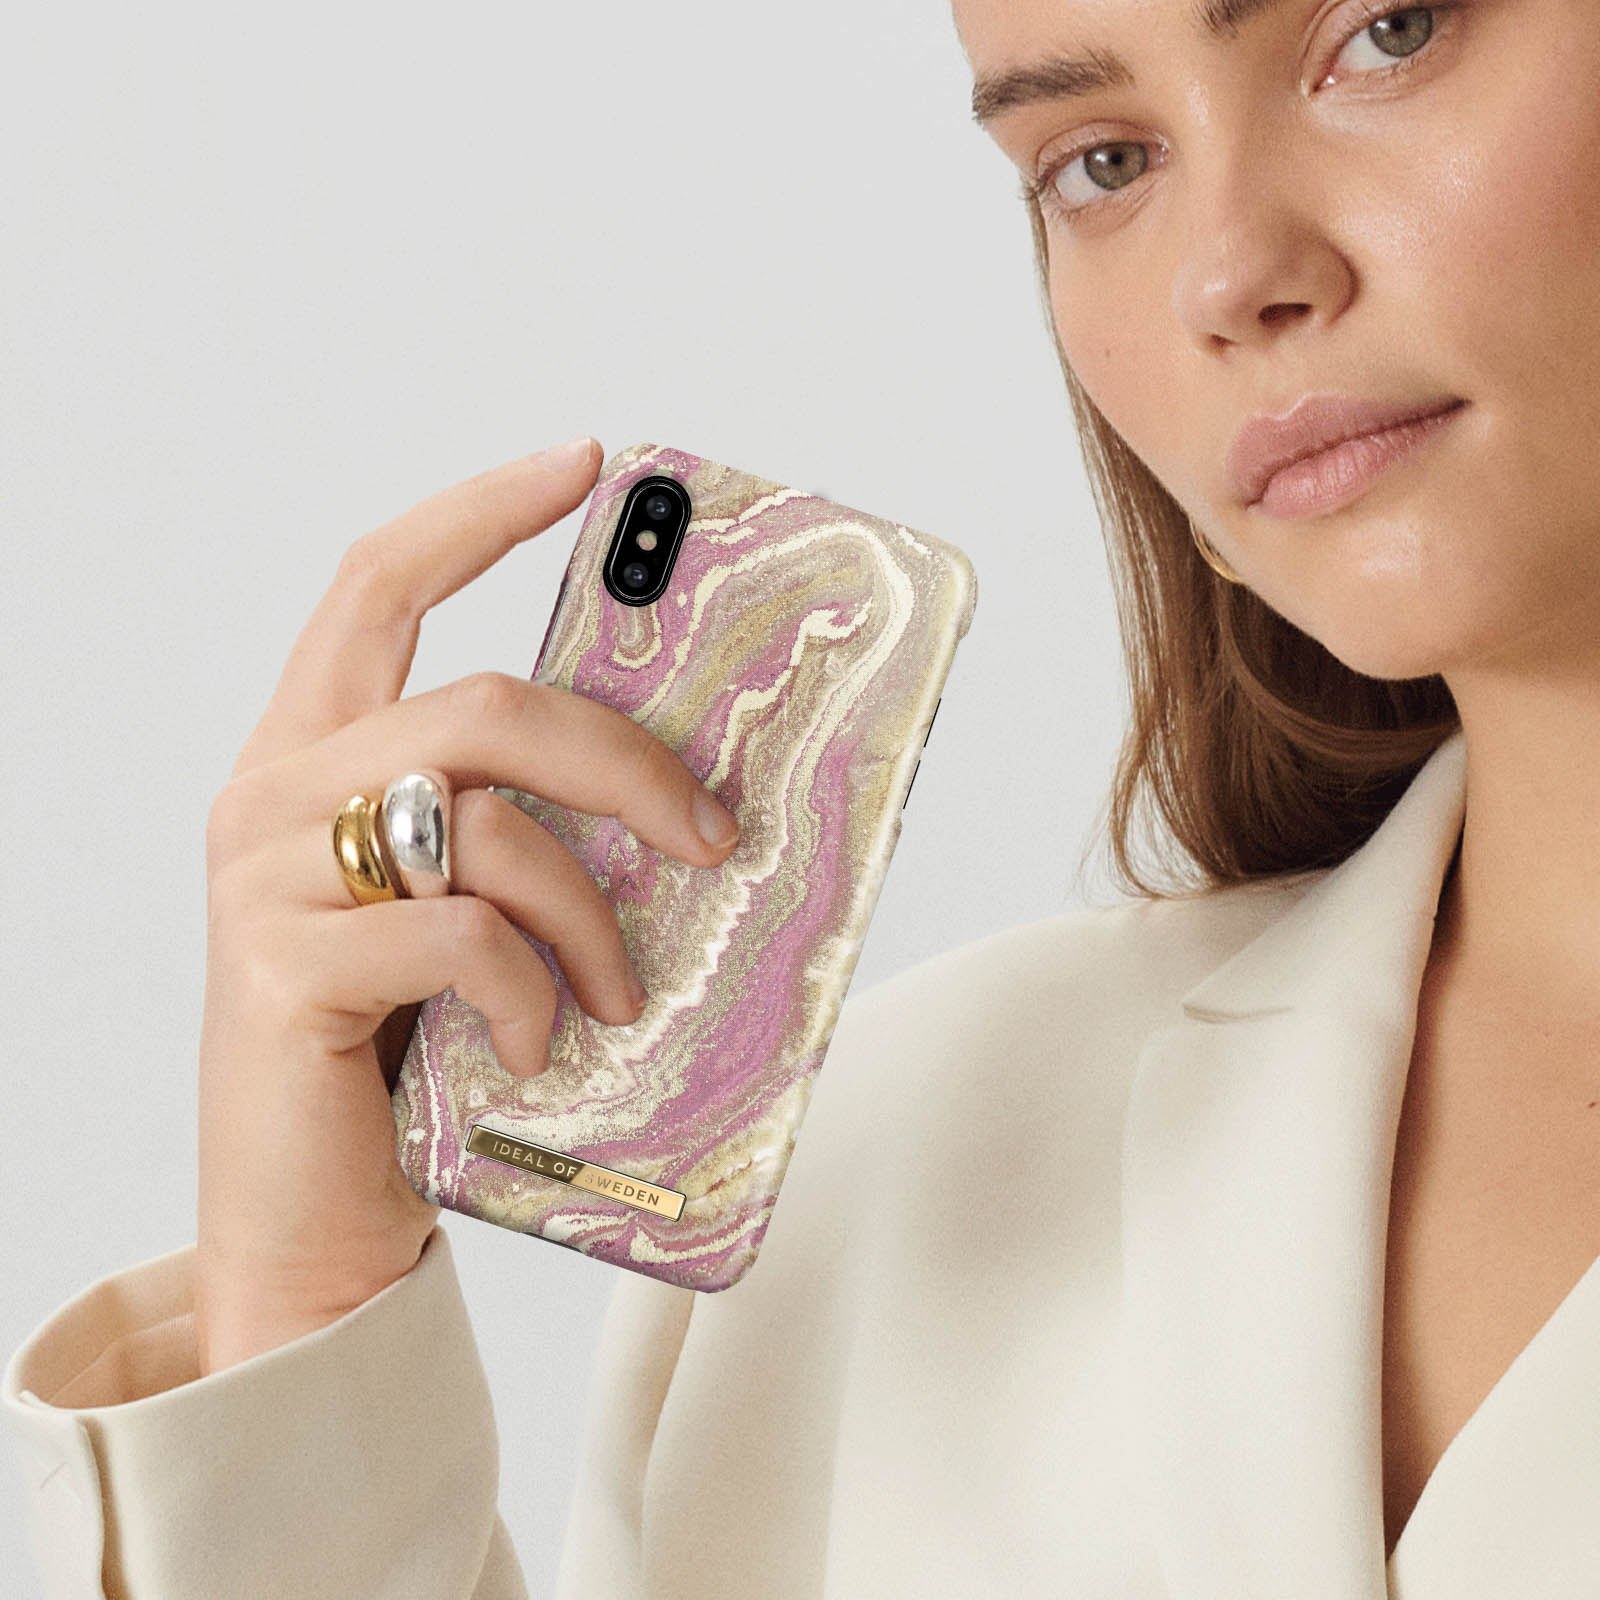 Max, Golden SWEDEN XS Hülle Backcover, Marble OF Rosa Blush Series, IDEAL iPhone Apple,